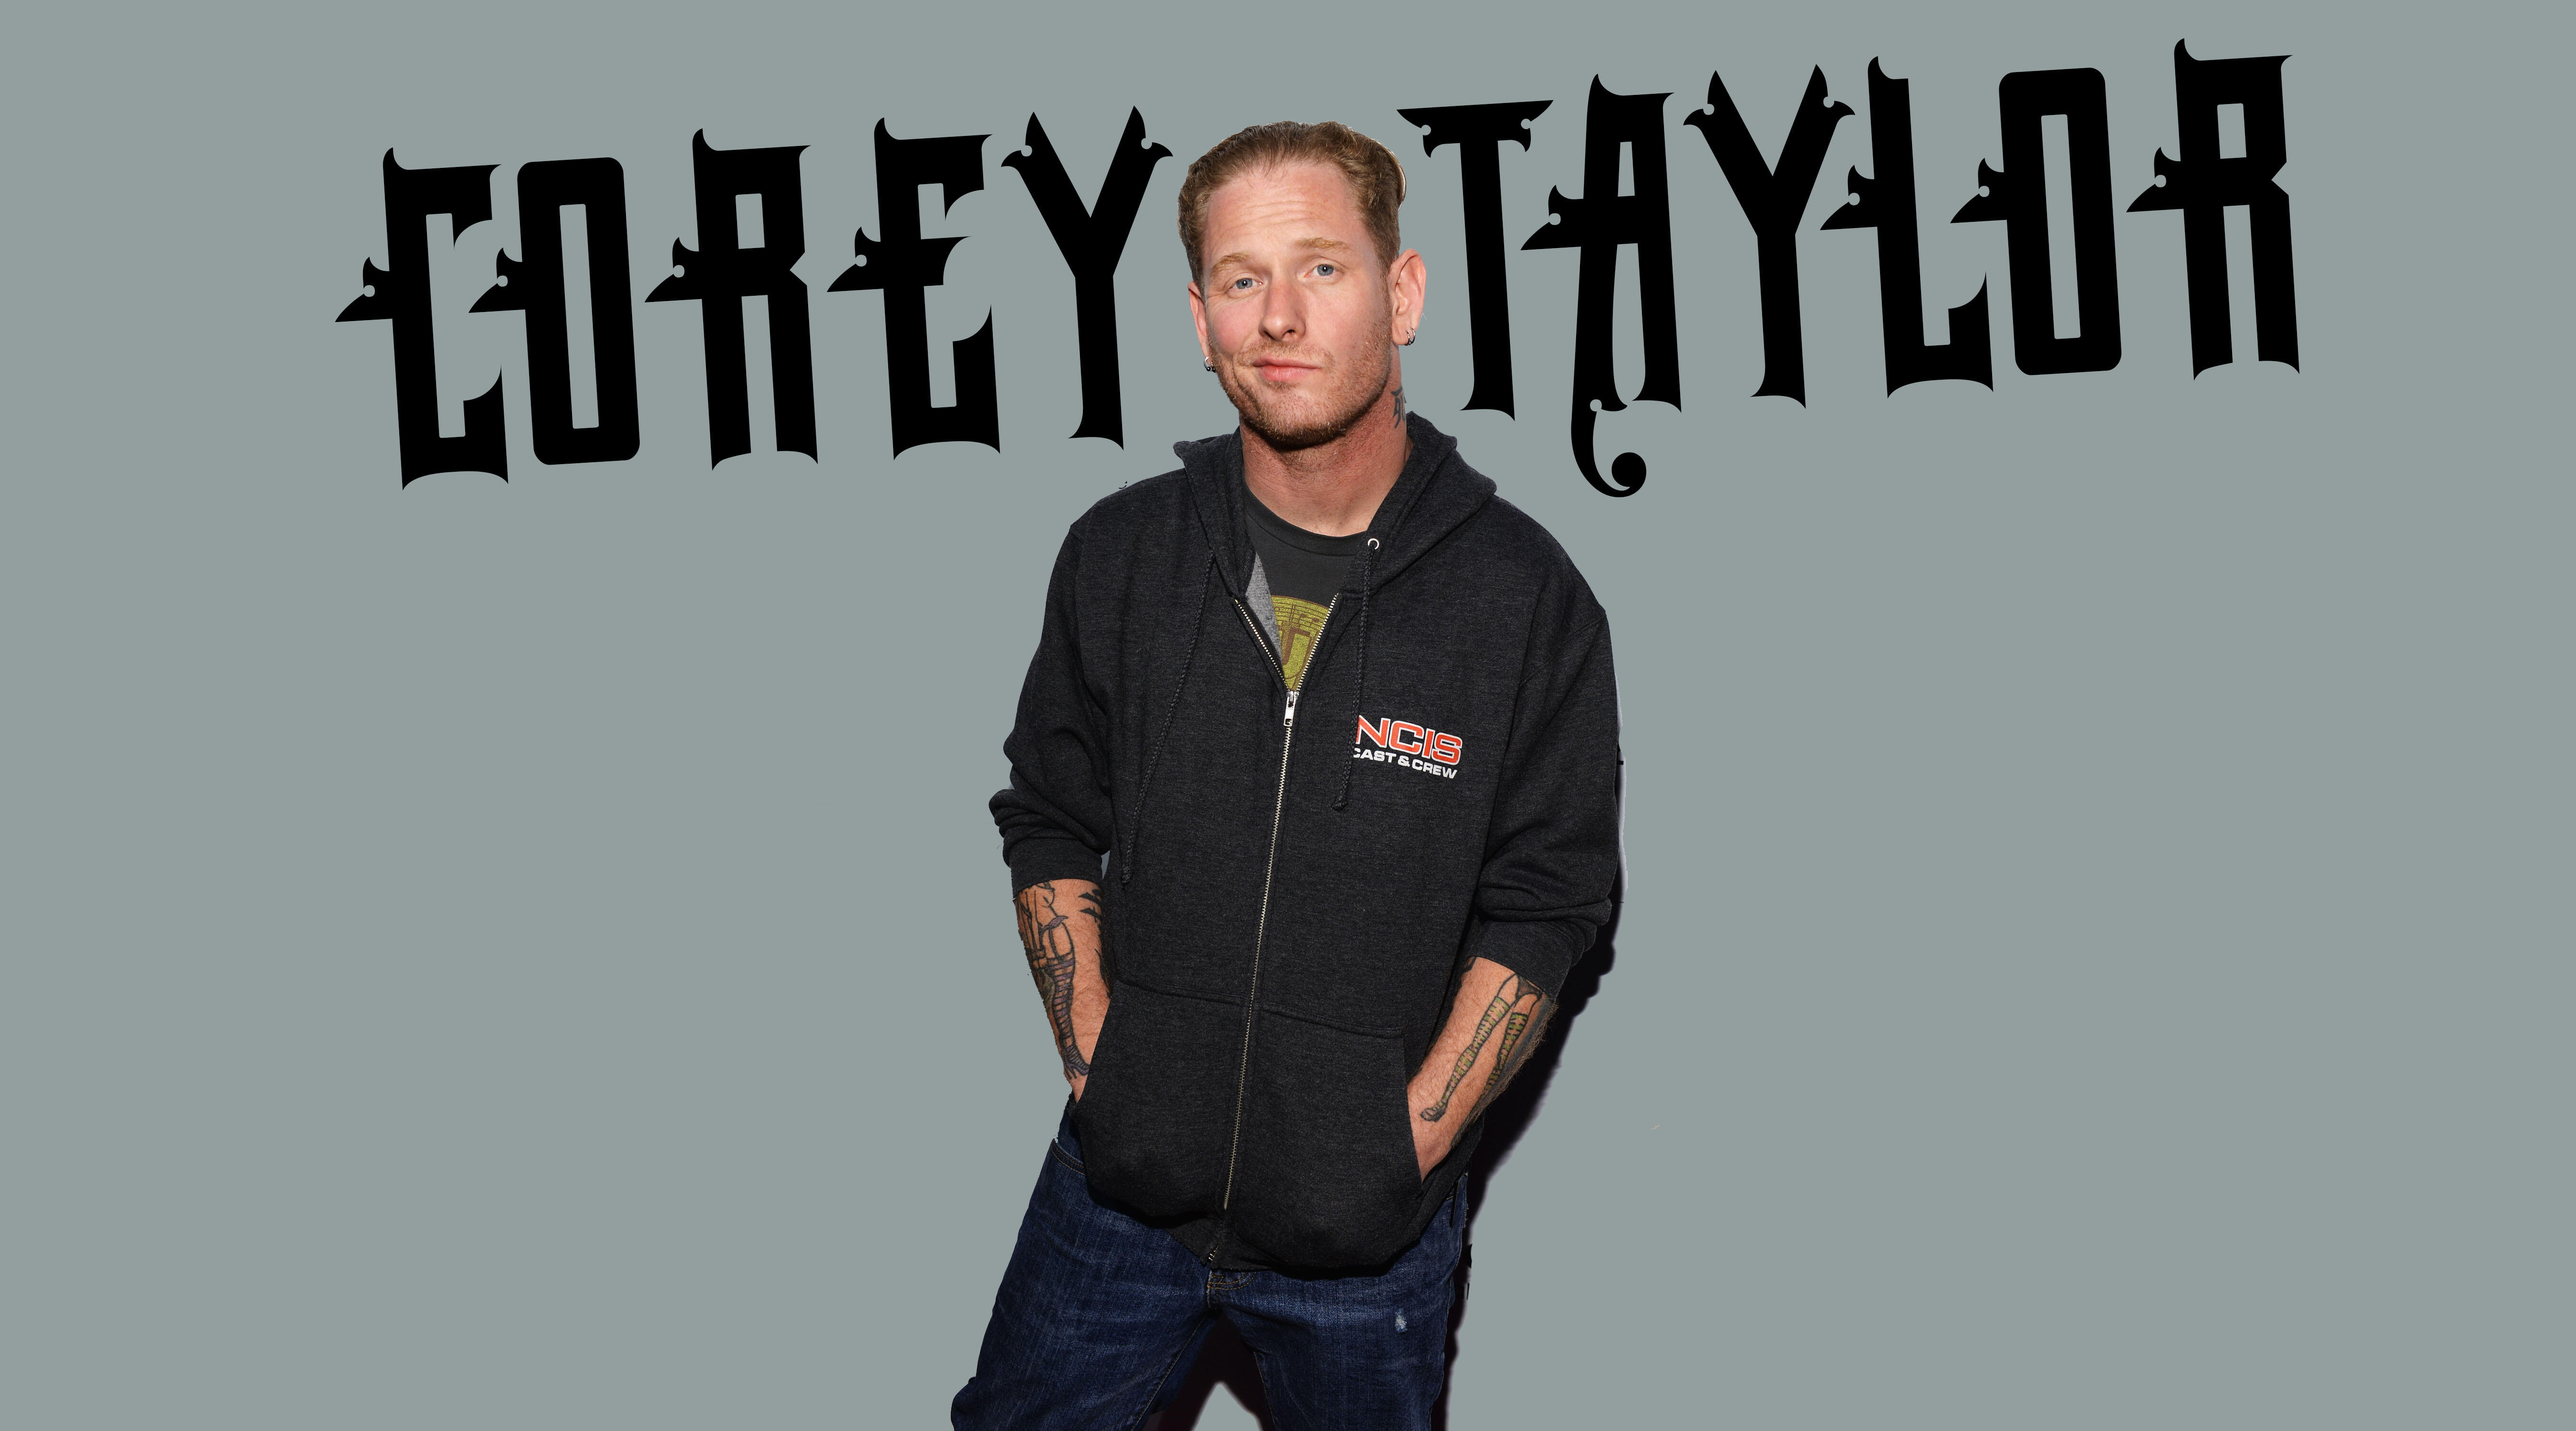 SAN DIEGO, CA - JULY 20:  Musician Corey Taylor attends Sony Pictures Home Entertainment and Evil Dead Blu-ray Fan Party At Comic Con 2013 at The Commons Bar on July 20, 2013 in San Diego, California.  (Photo by Michael Kovac/Getty Images for IGN Entertai